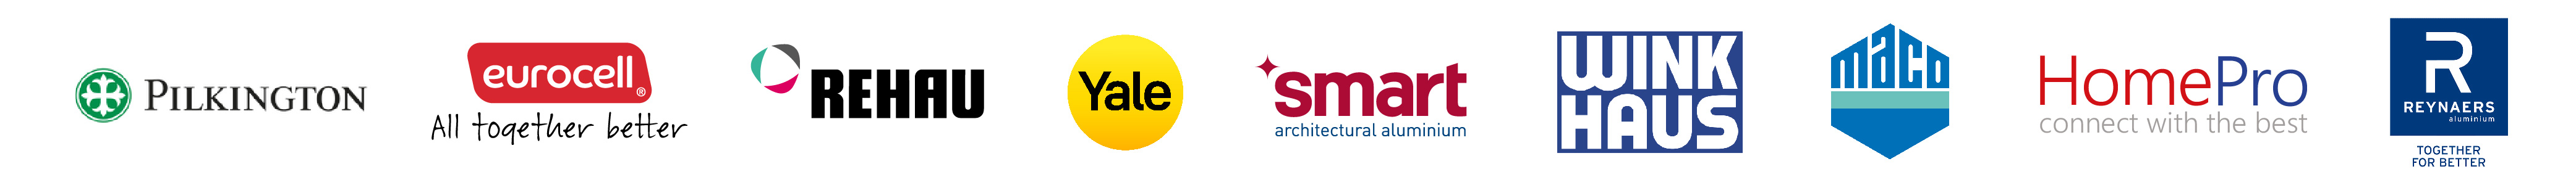 supplier logos including Pilkington, Reynaers, Smart Architectural, Yale and Maco.